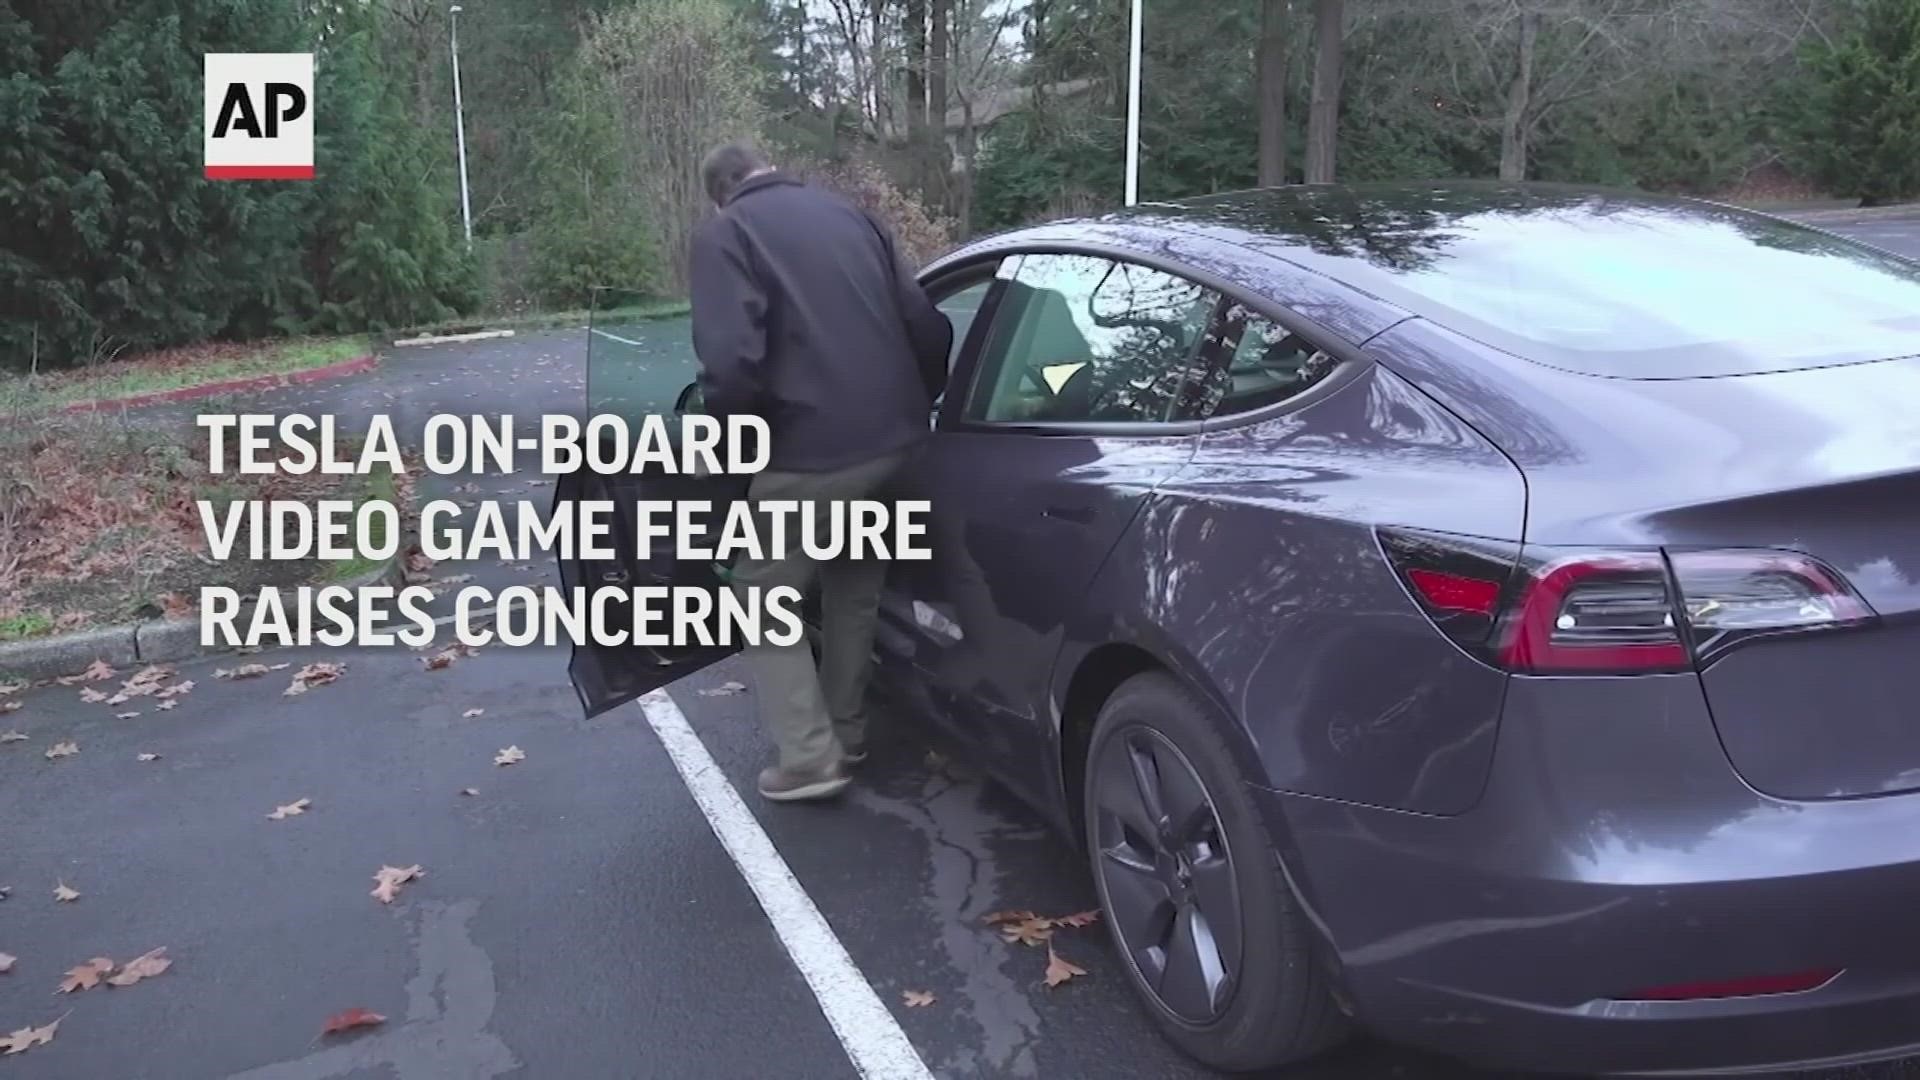 A Tesla owner made a compliant after finding he could play video games while driving. "I was dumbfounded."